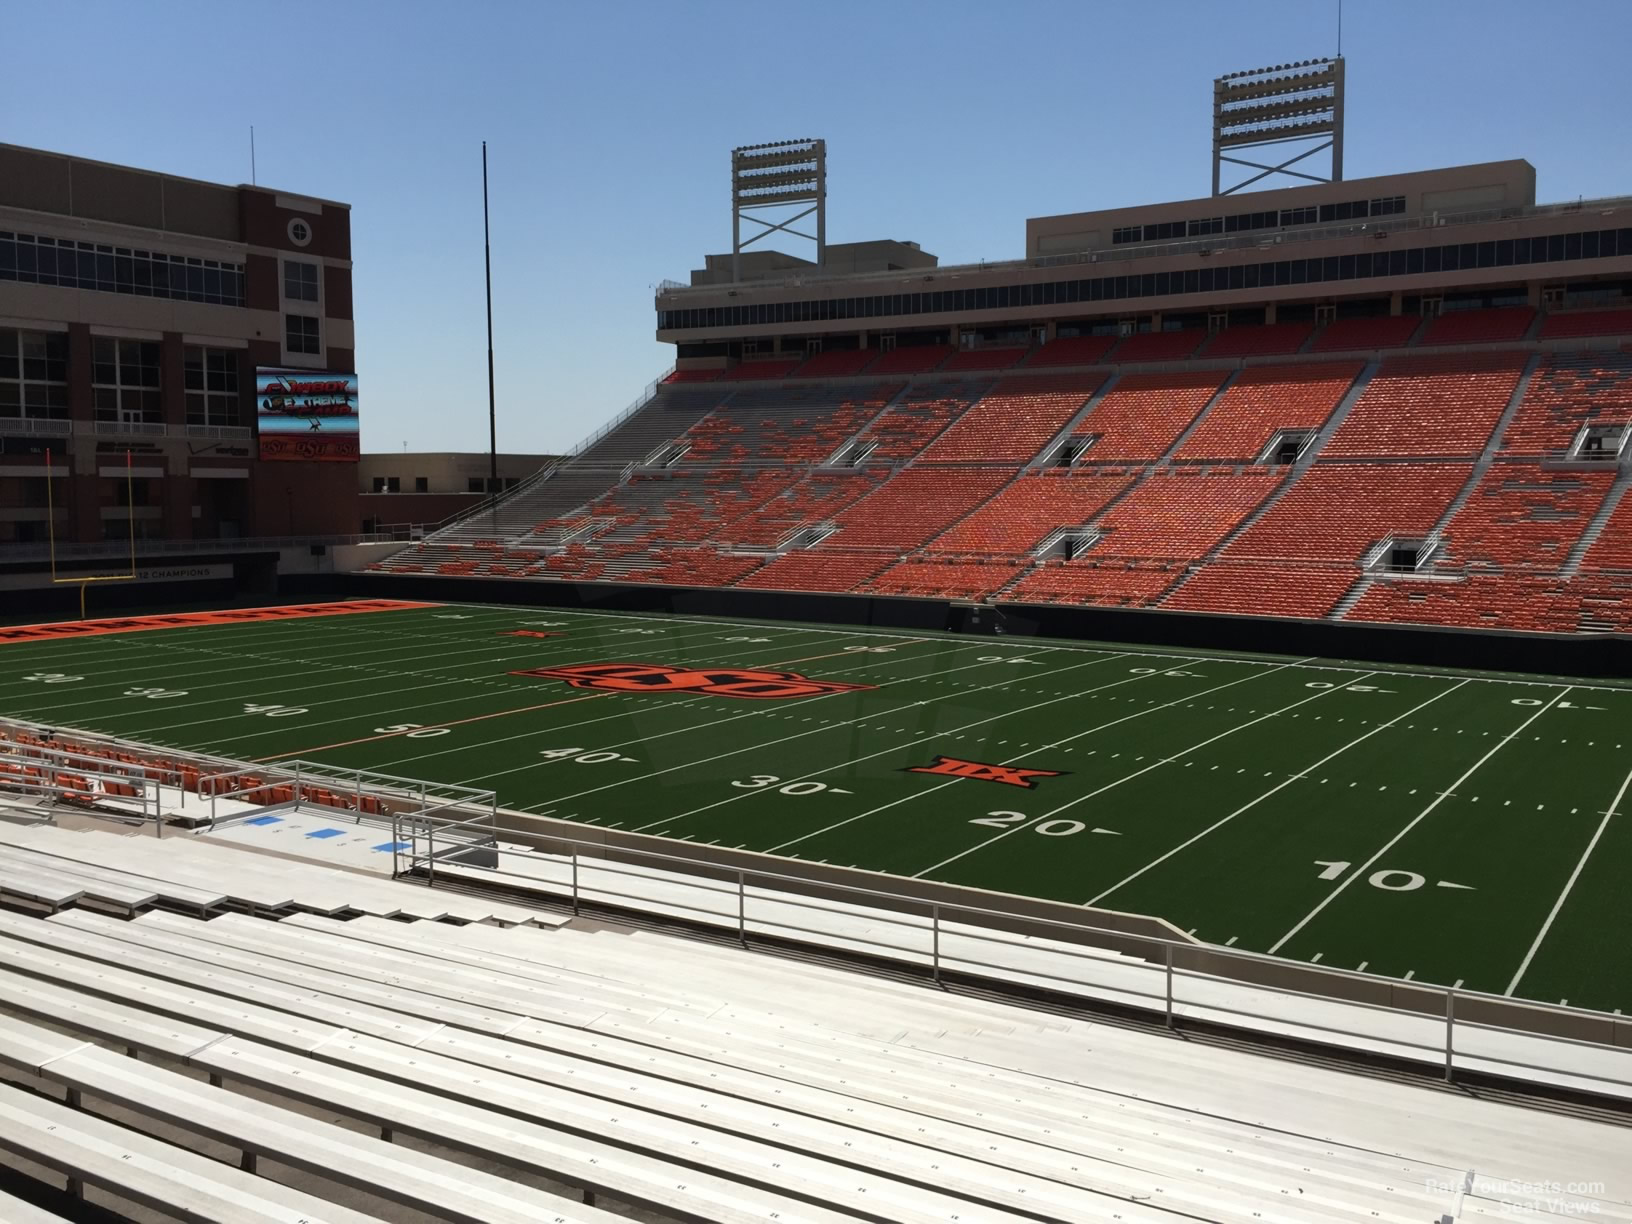 section 223a, row 20 seat view  - boone pickens stadium